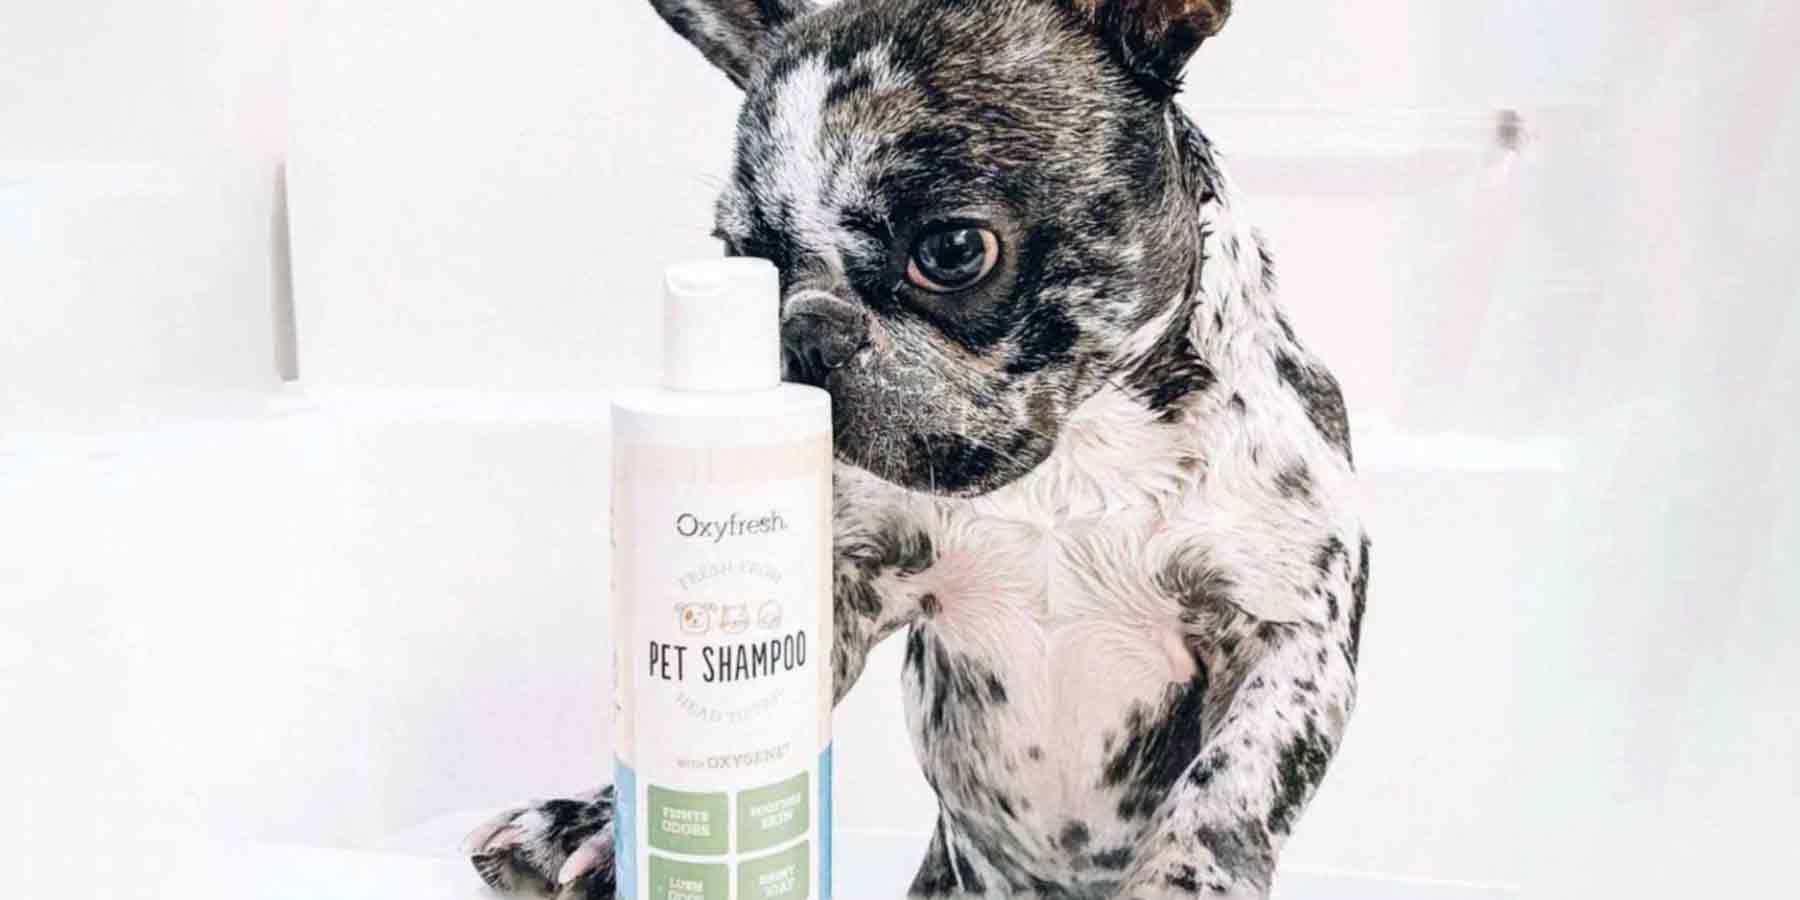 Social-Media-Post-From-Instagram-User-_the.frenchie.merle.girls--frenchie-in-bathtub-smelling-oxyfresh-pet-shampoo-for-dry-skin-and-a-clean-coat